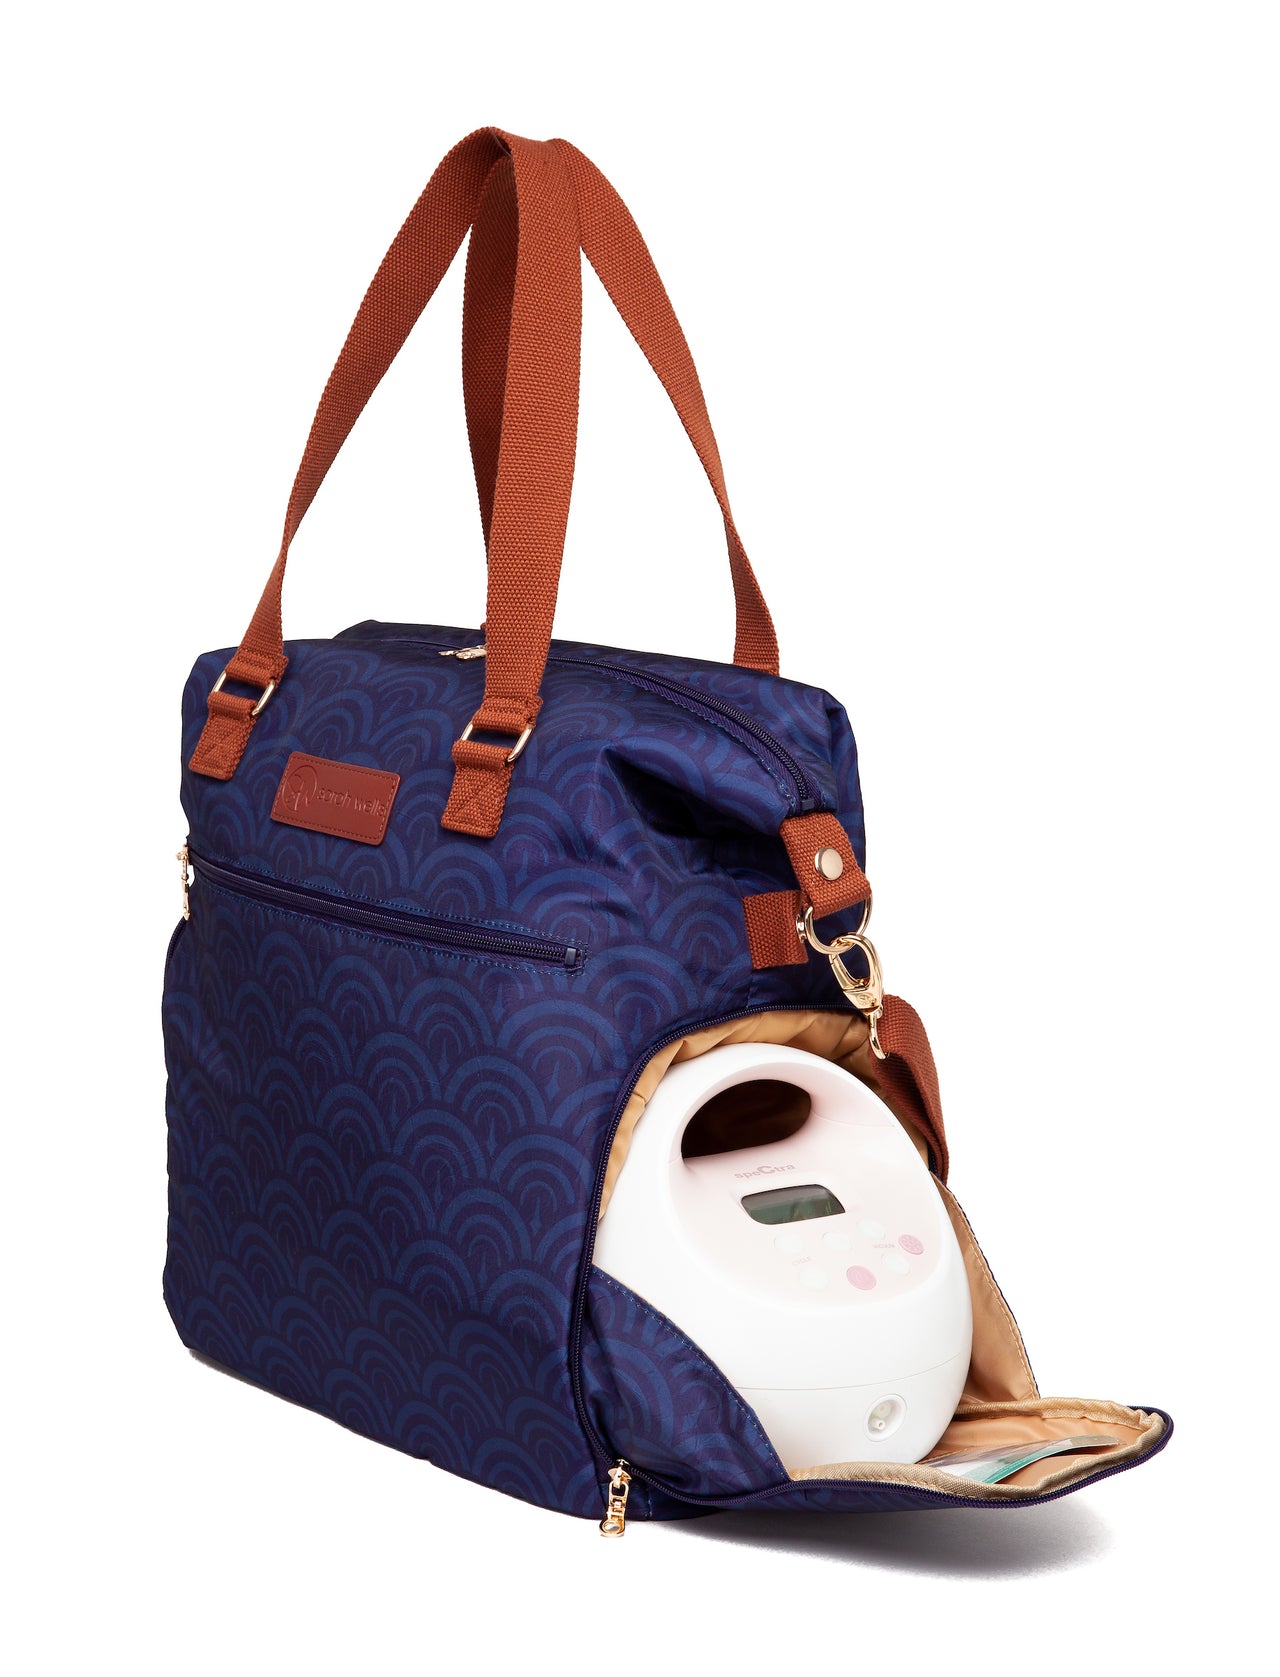 Lizzy (Deco) / Breast Pump Bags & Accessories from Sarah Wells